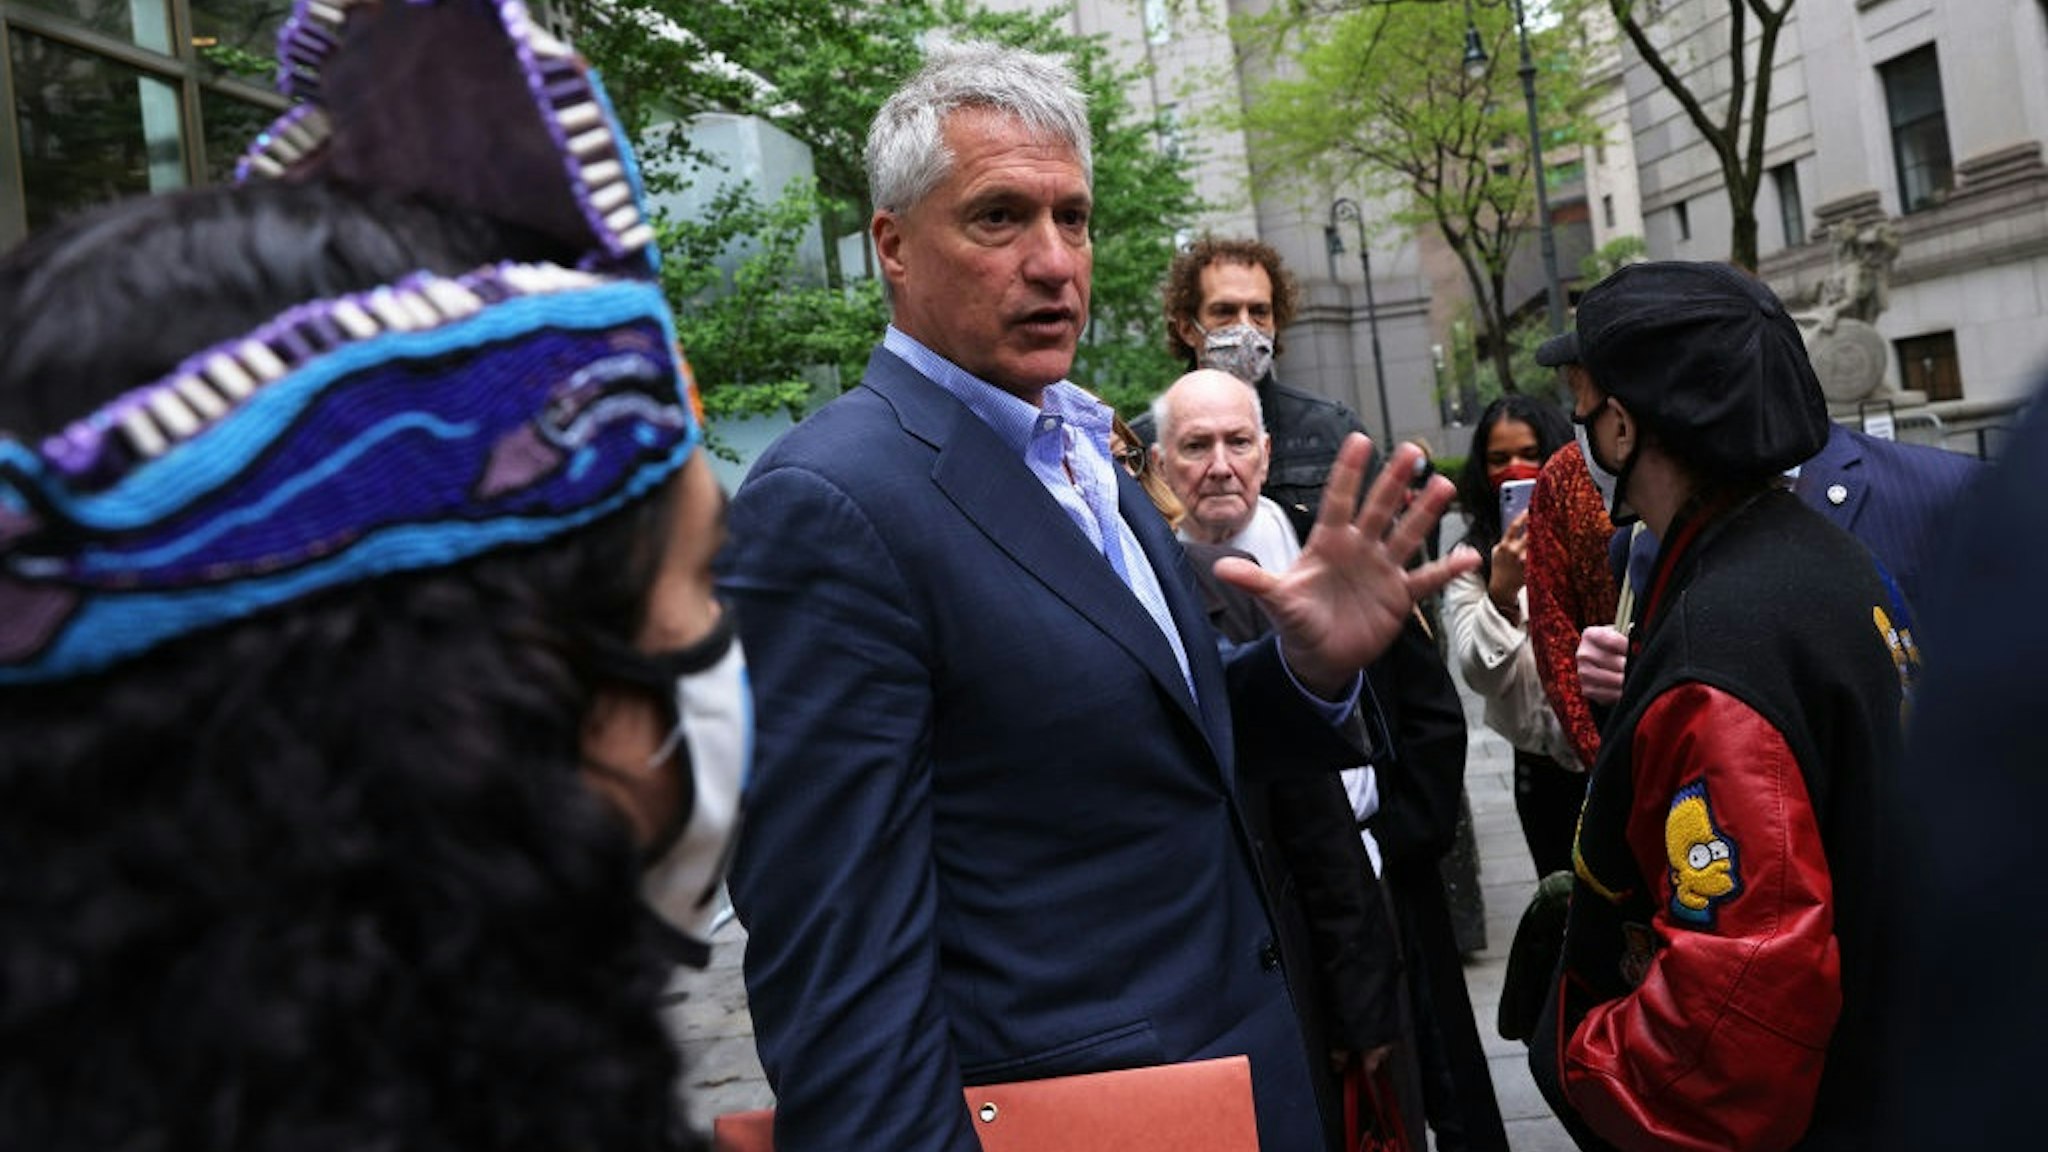 NEW YORK, NEW YORK - MAY 10: Attorney Steven Donziger speaks to his supporters as he arrives for a court appearance at Daniel Patrick Moynihan United States Courthouse in Manhattan on May 10, 2021 in New York City.